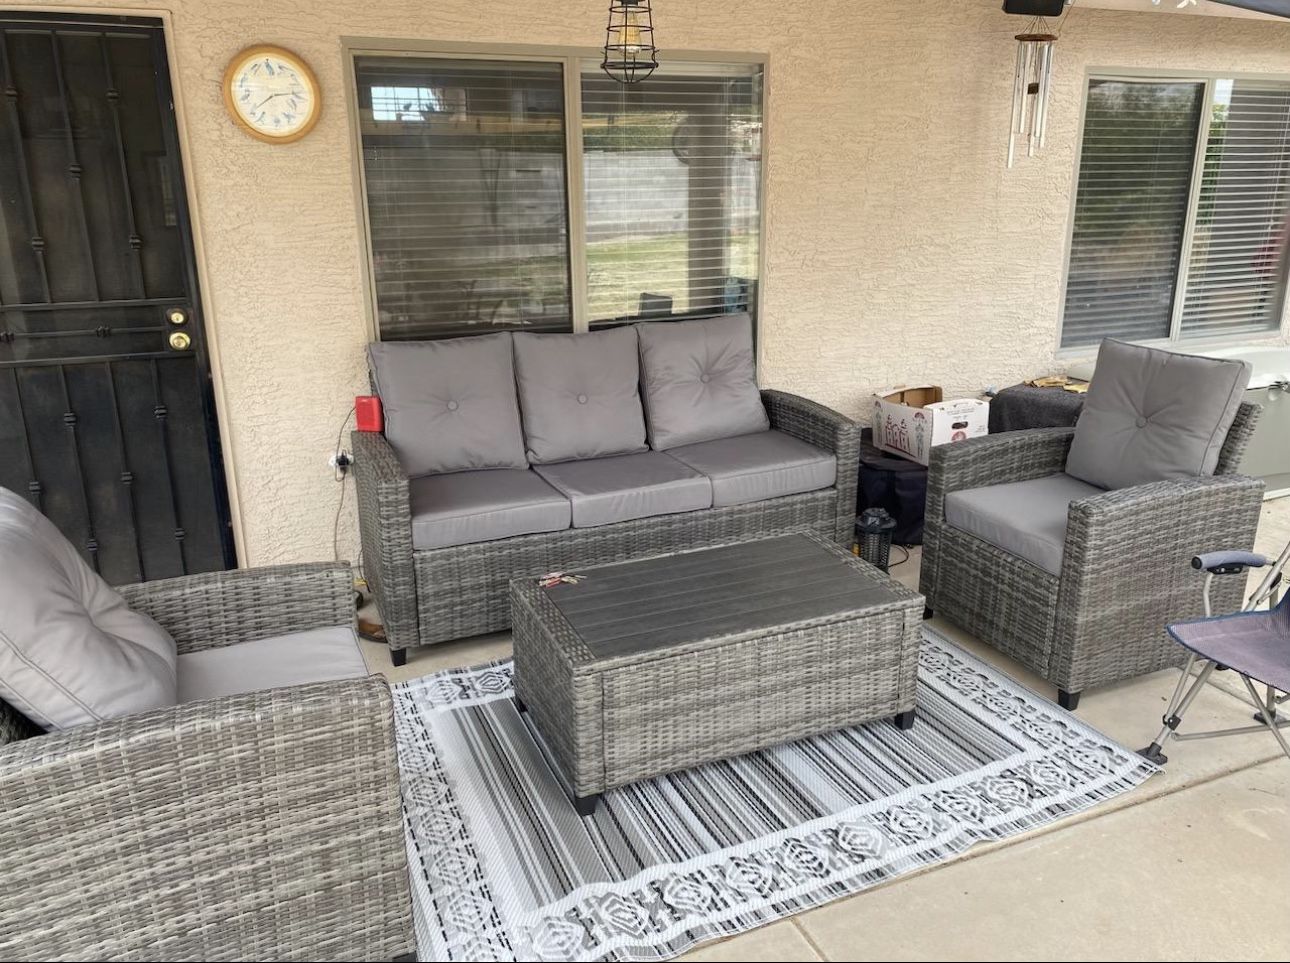 4 Piece Patio Furniture Set w/ Thick Cushions and Hard Top Table *NEW*LOCAL DELIVERY**